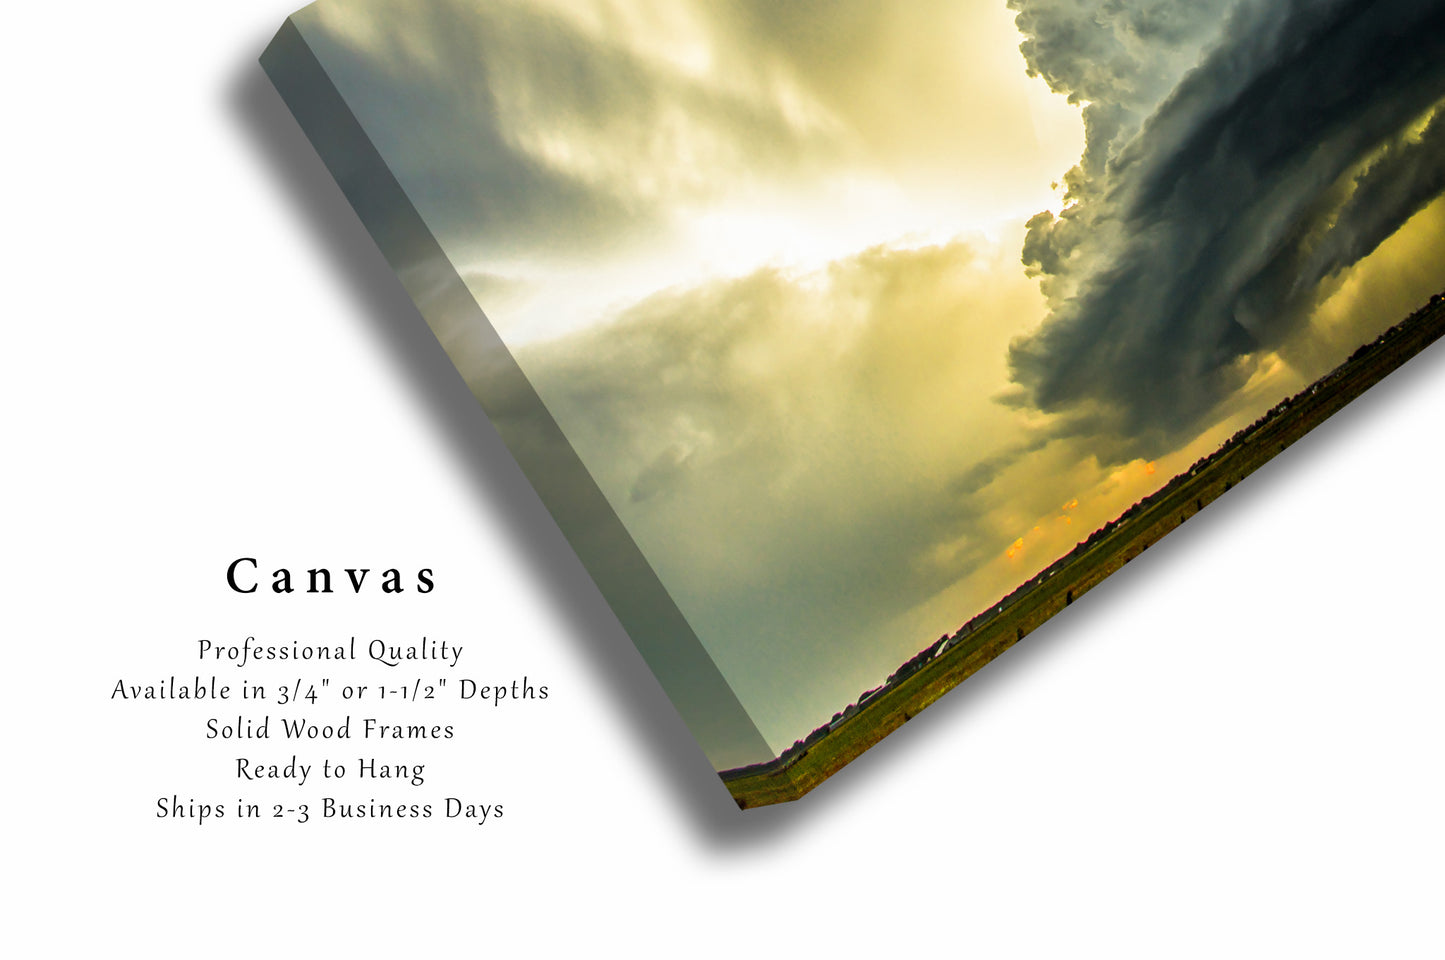 Storm Canvas Wall Art - Gallery Wrap of Supercell Thunderstorm on Spring Day in Oklahoma - Weather Landscape Photography Artwork Photo Decor